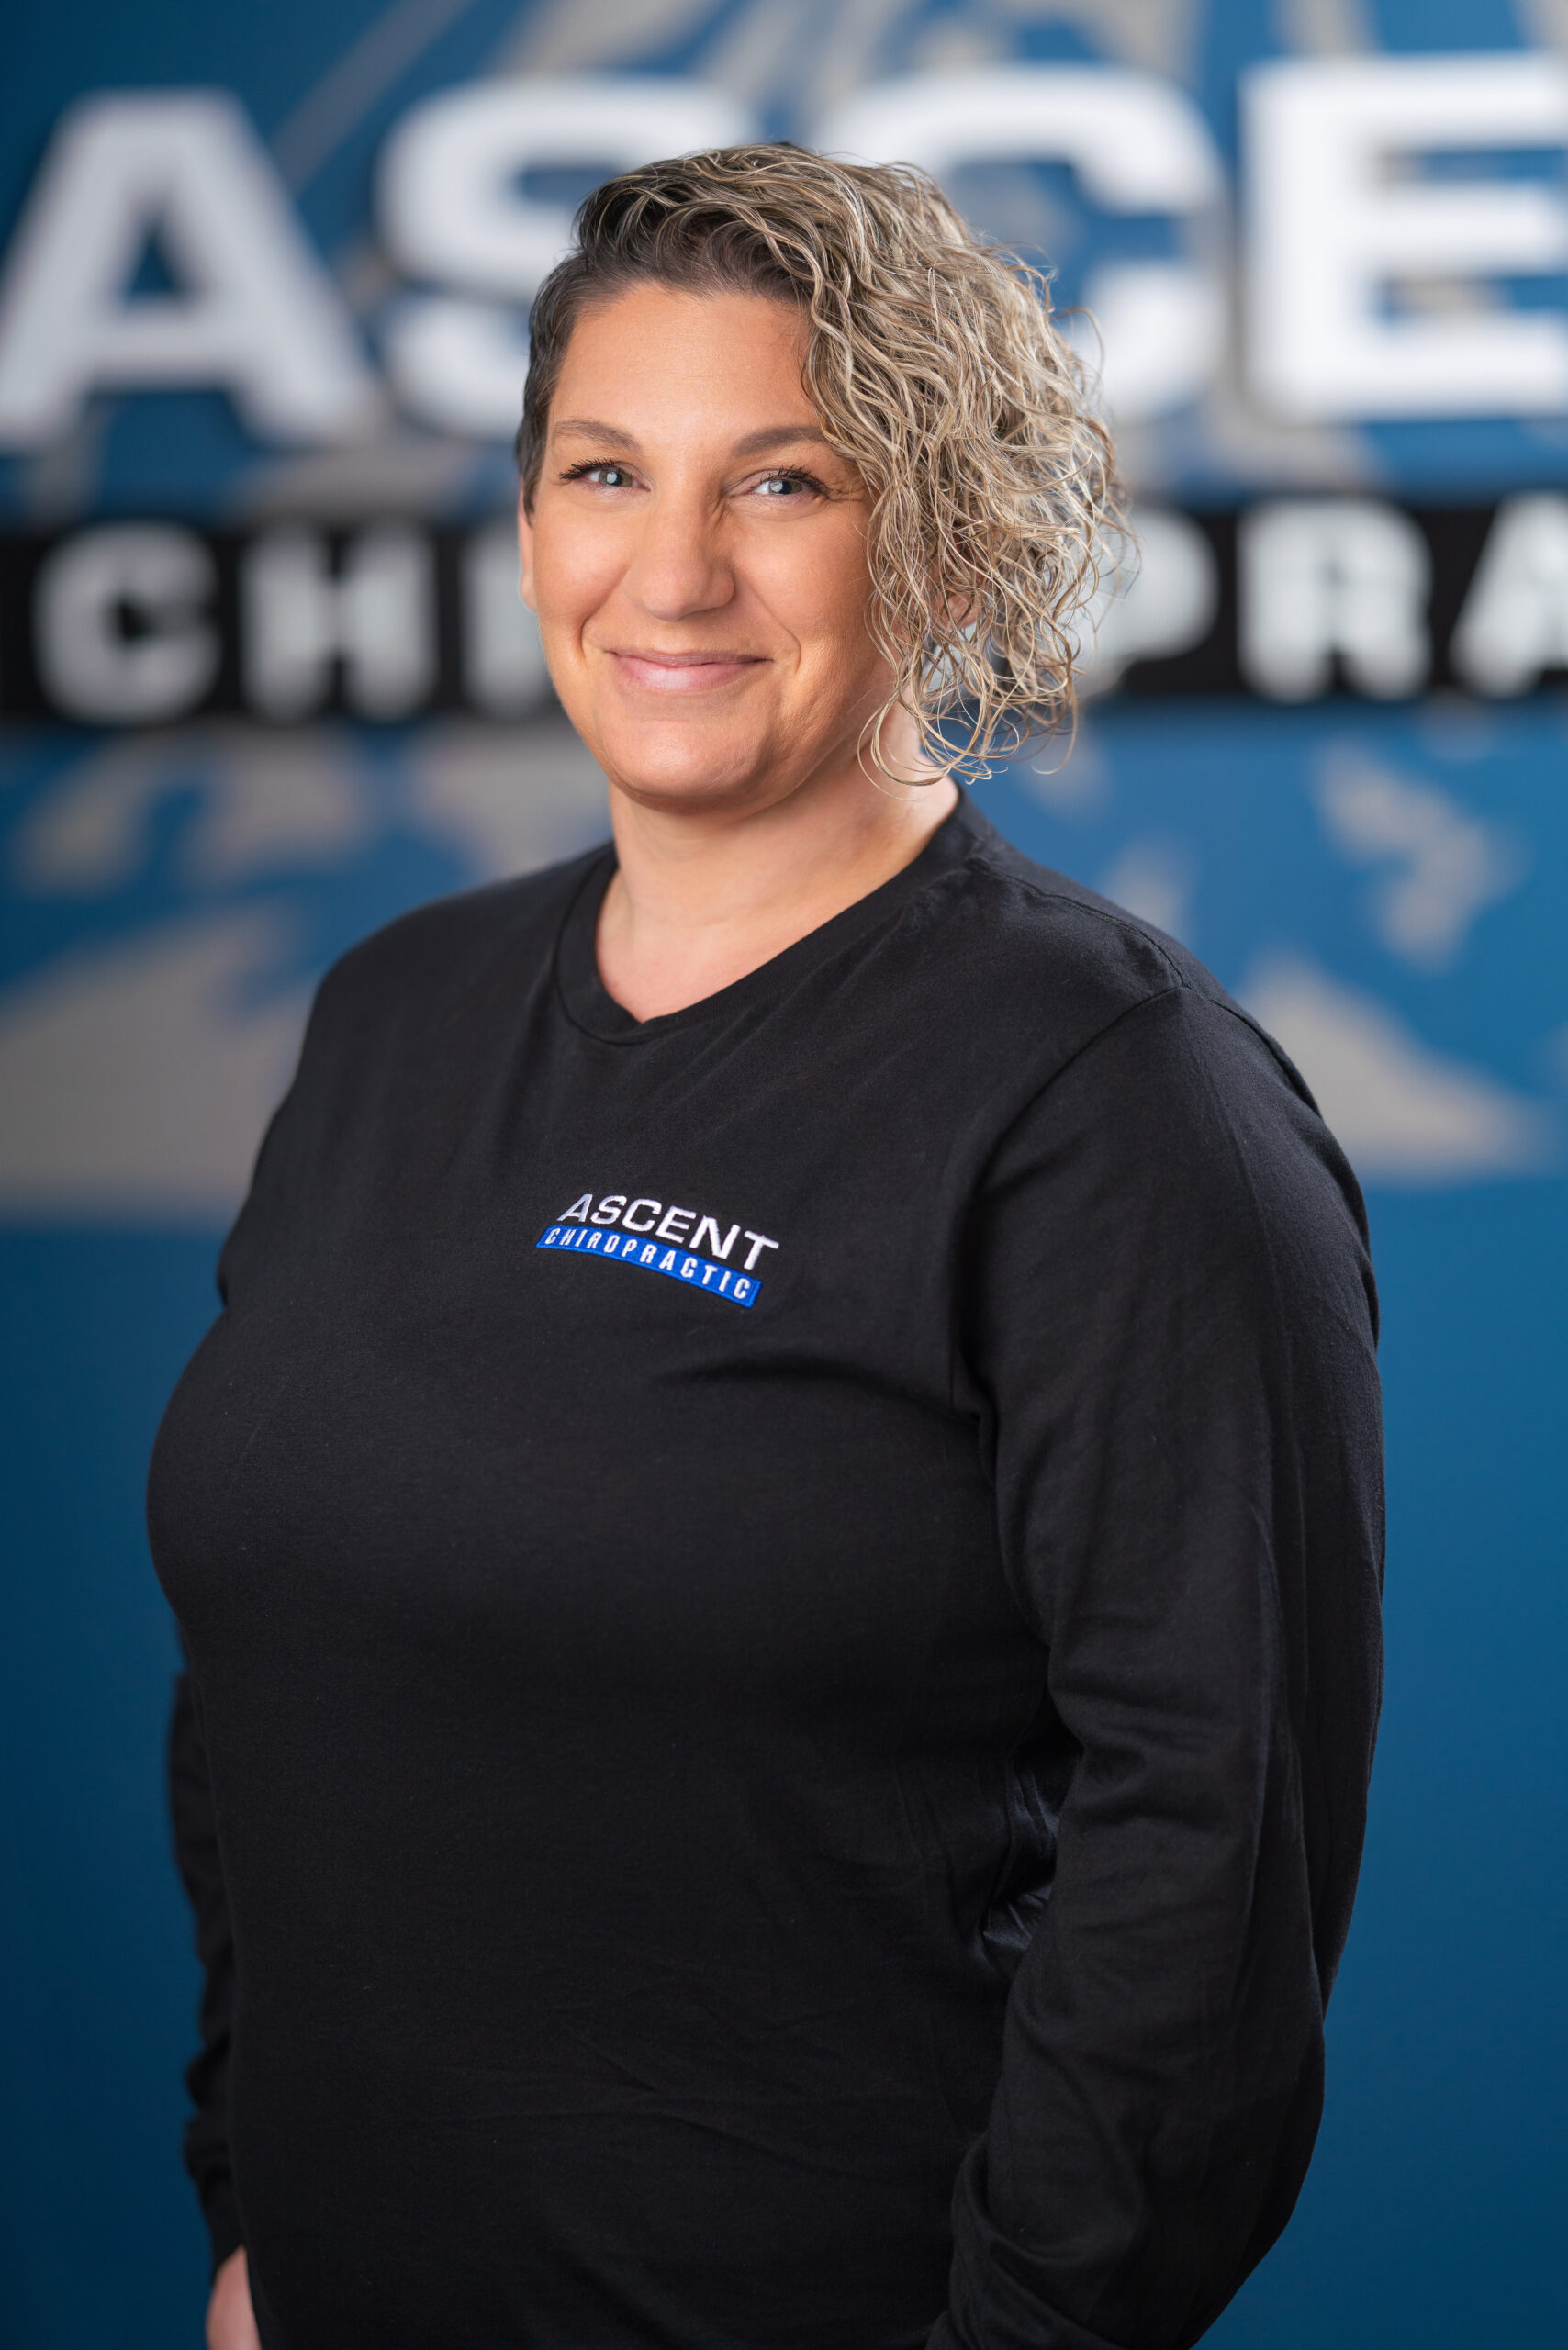 female with curly hair and ascent chiropactric logo shirt headshot